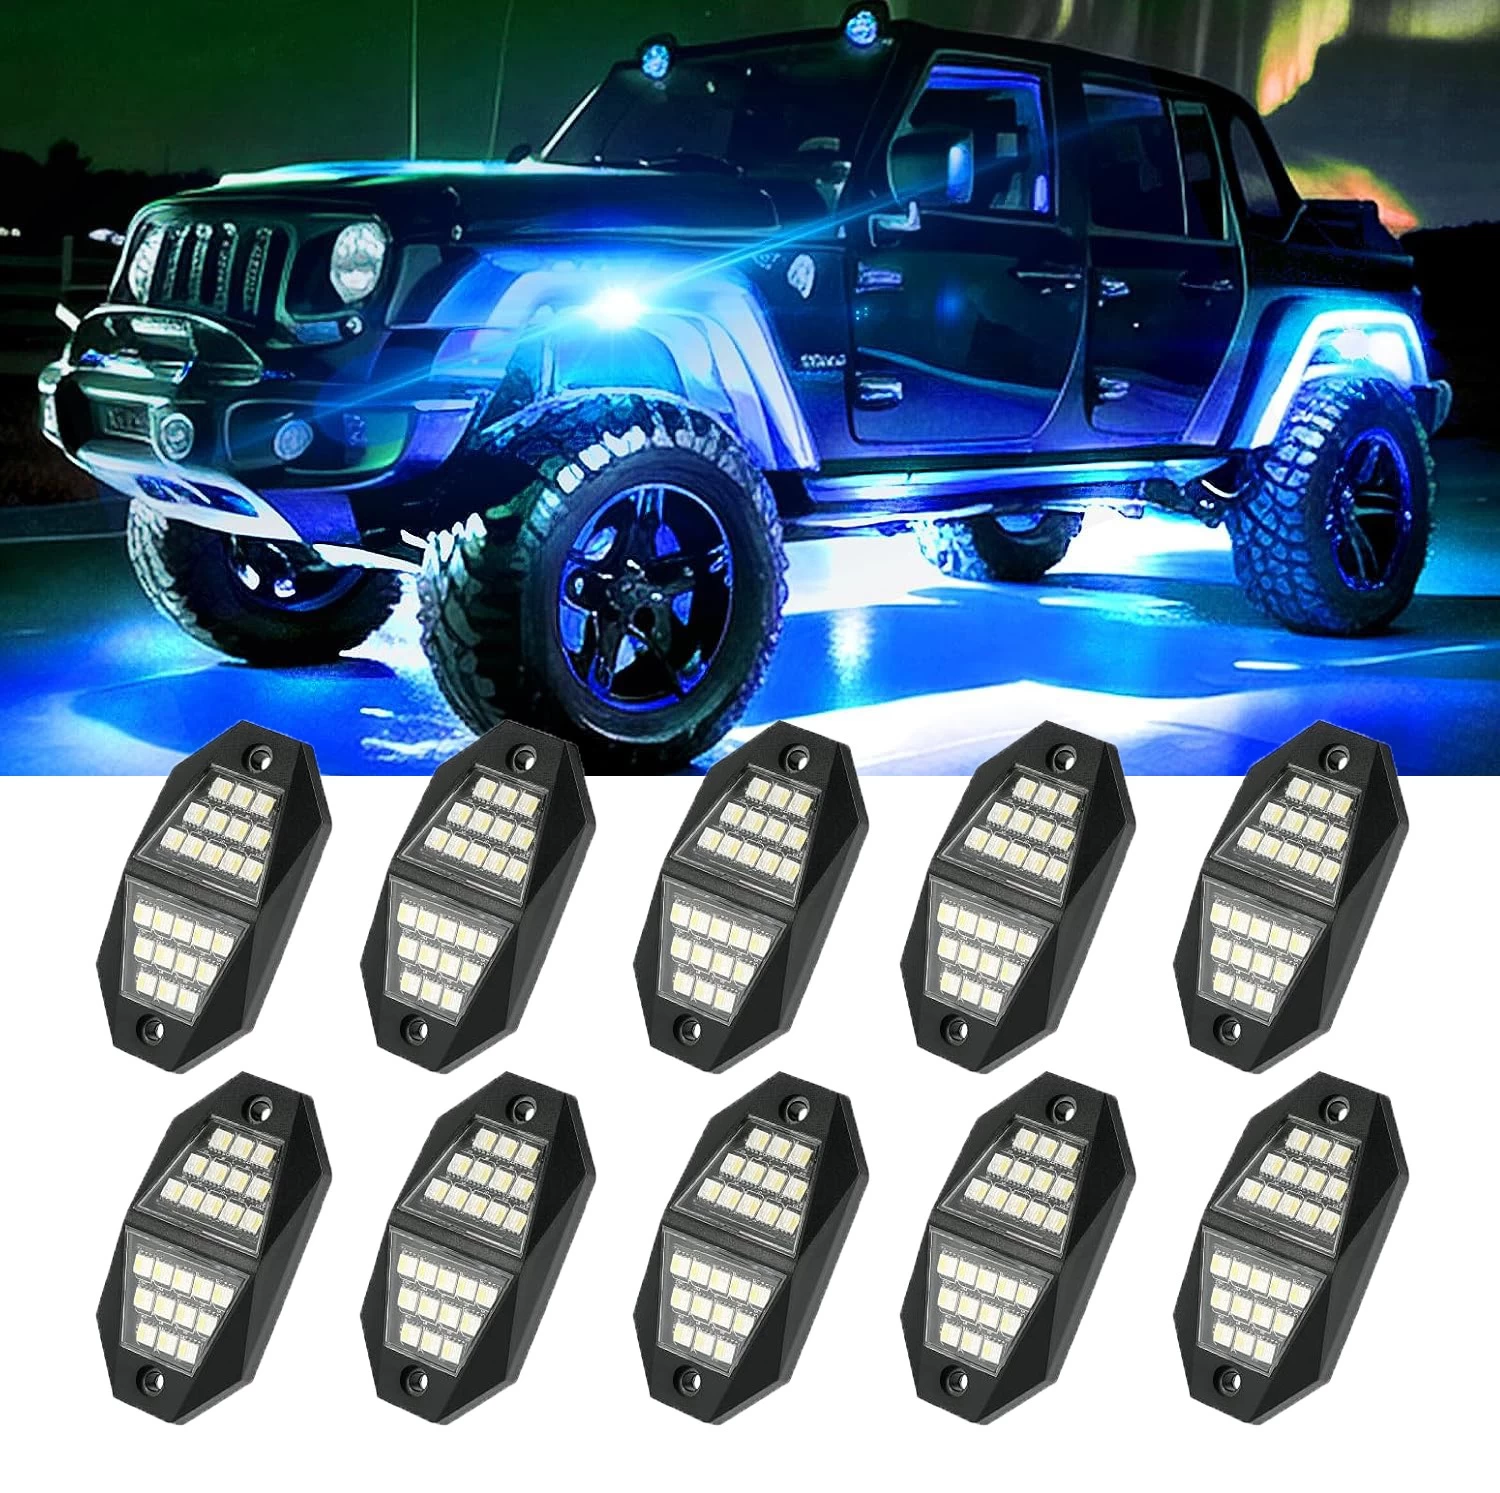 China 5 Sides LED Rock Lights 8 Pods Multicolor Underglow Lights for Trucks with App Control Flashing Music Mode RGB Rock Lights for Boat SUV Car Accessories - COPY - lf3jlu fabrikant